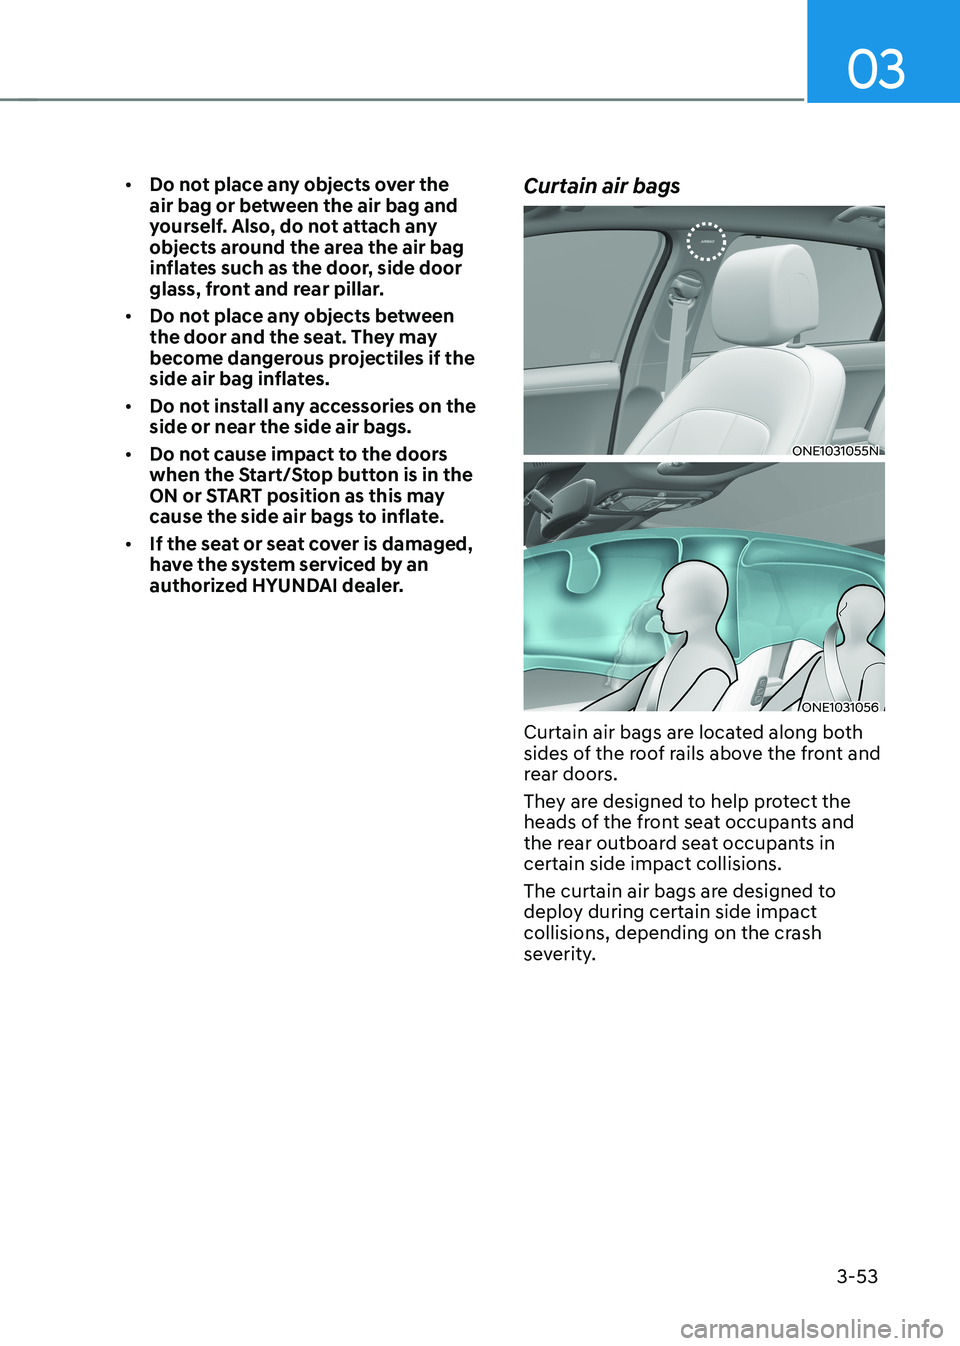 HYUNDAI IONIQ 5 2023  Owners Manual 03
3-53
•	
Do not place any objects over the  
air bag or between the air bag and 
yourself. Also, do not attach any 
objects around the area the air bag 
inflates such as the door, side door 
glass